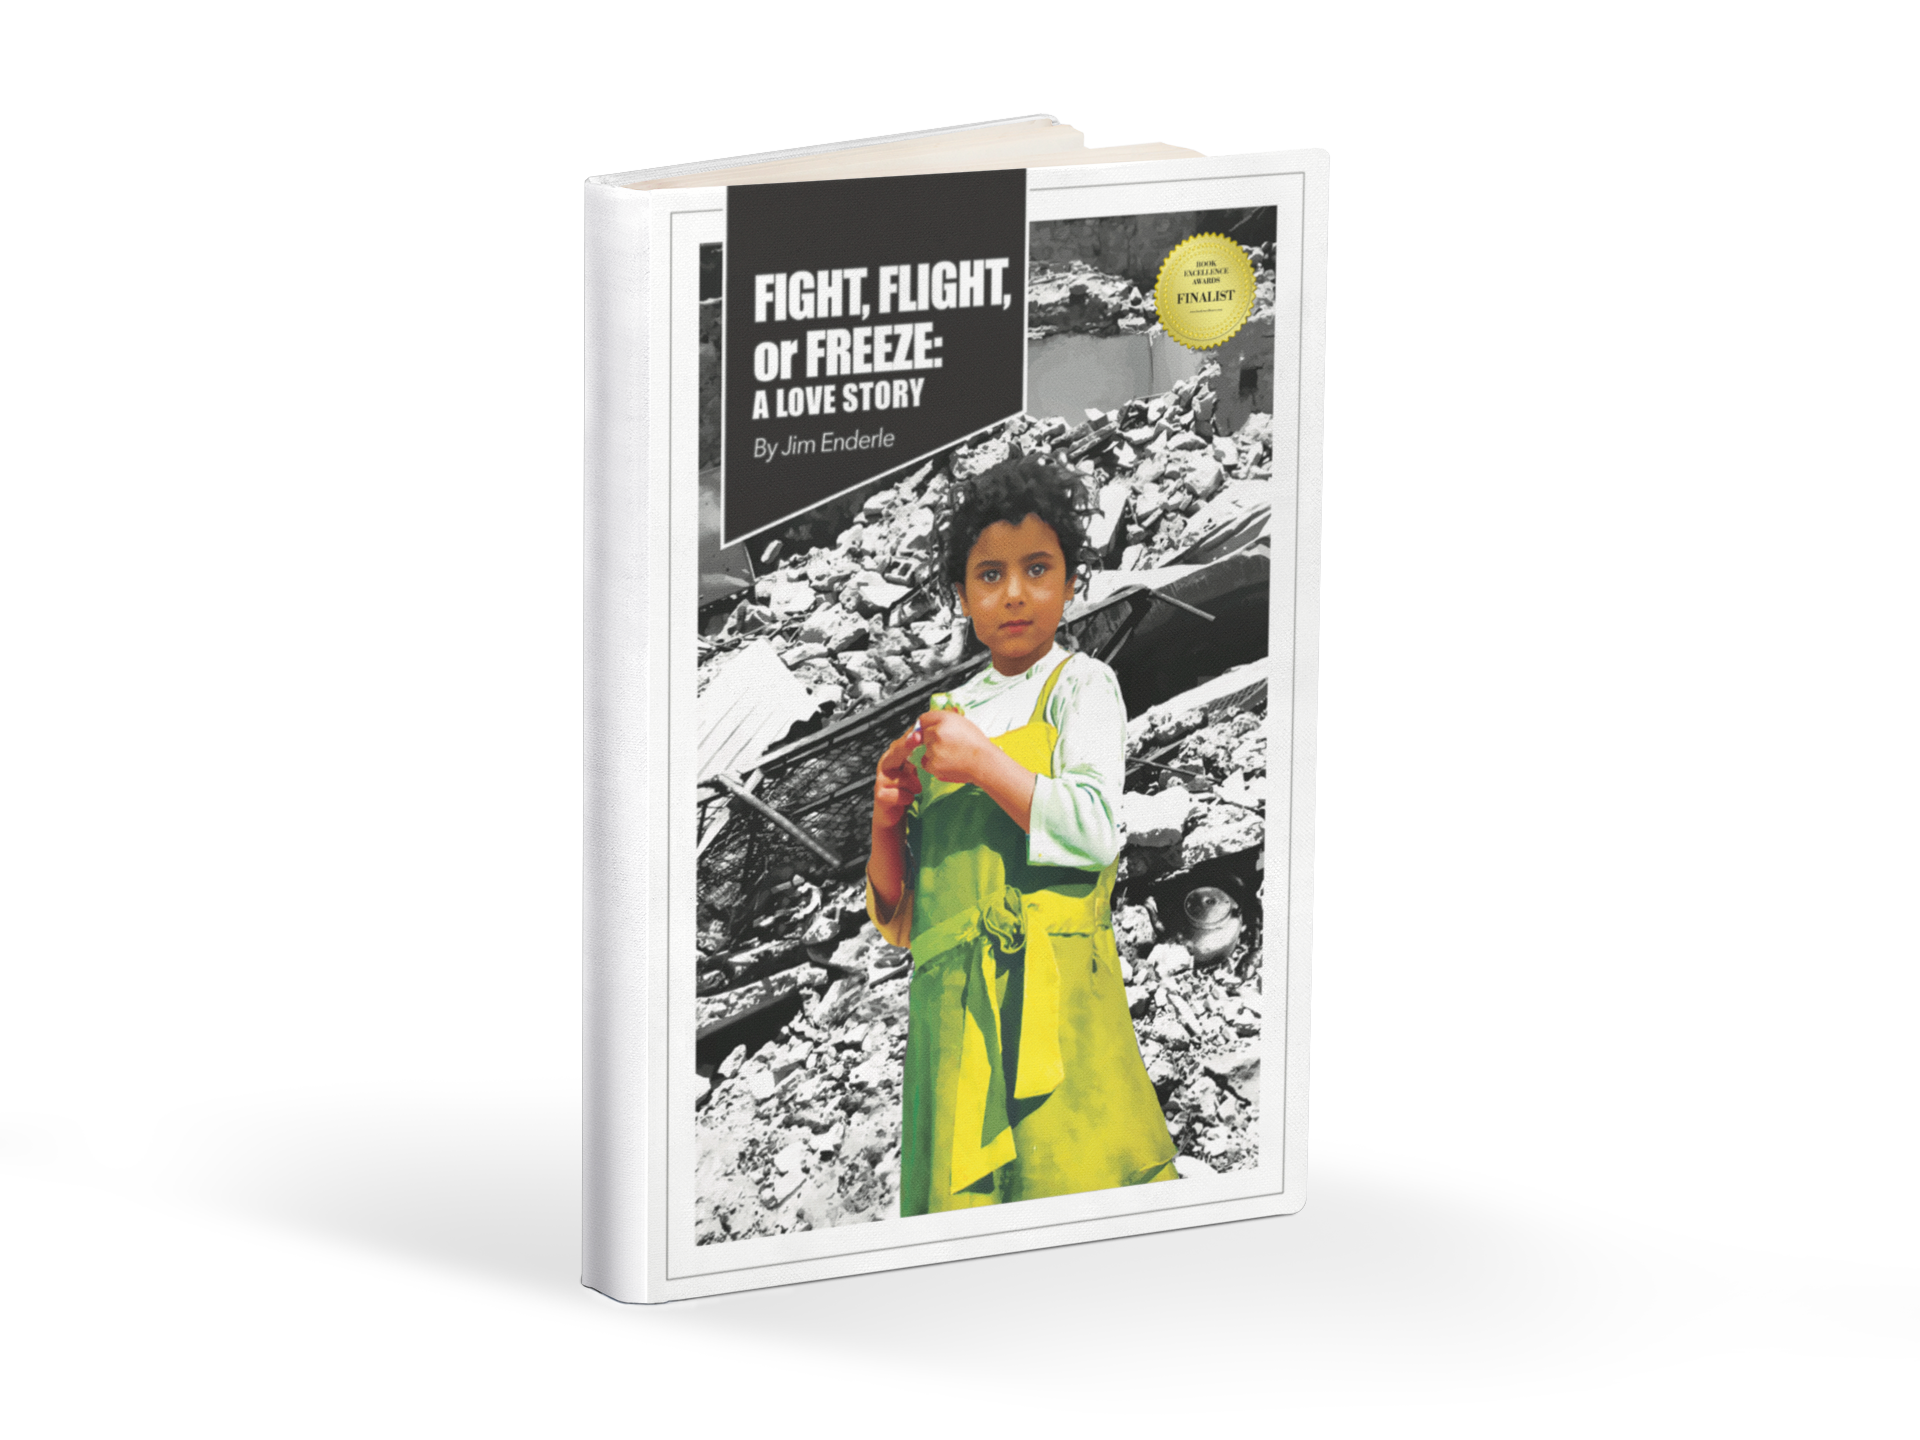 Fight, Flight, or Freeze: A Love Story Honored as a Finalist in International Book Contest